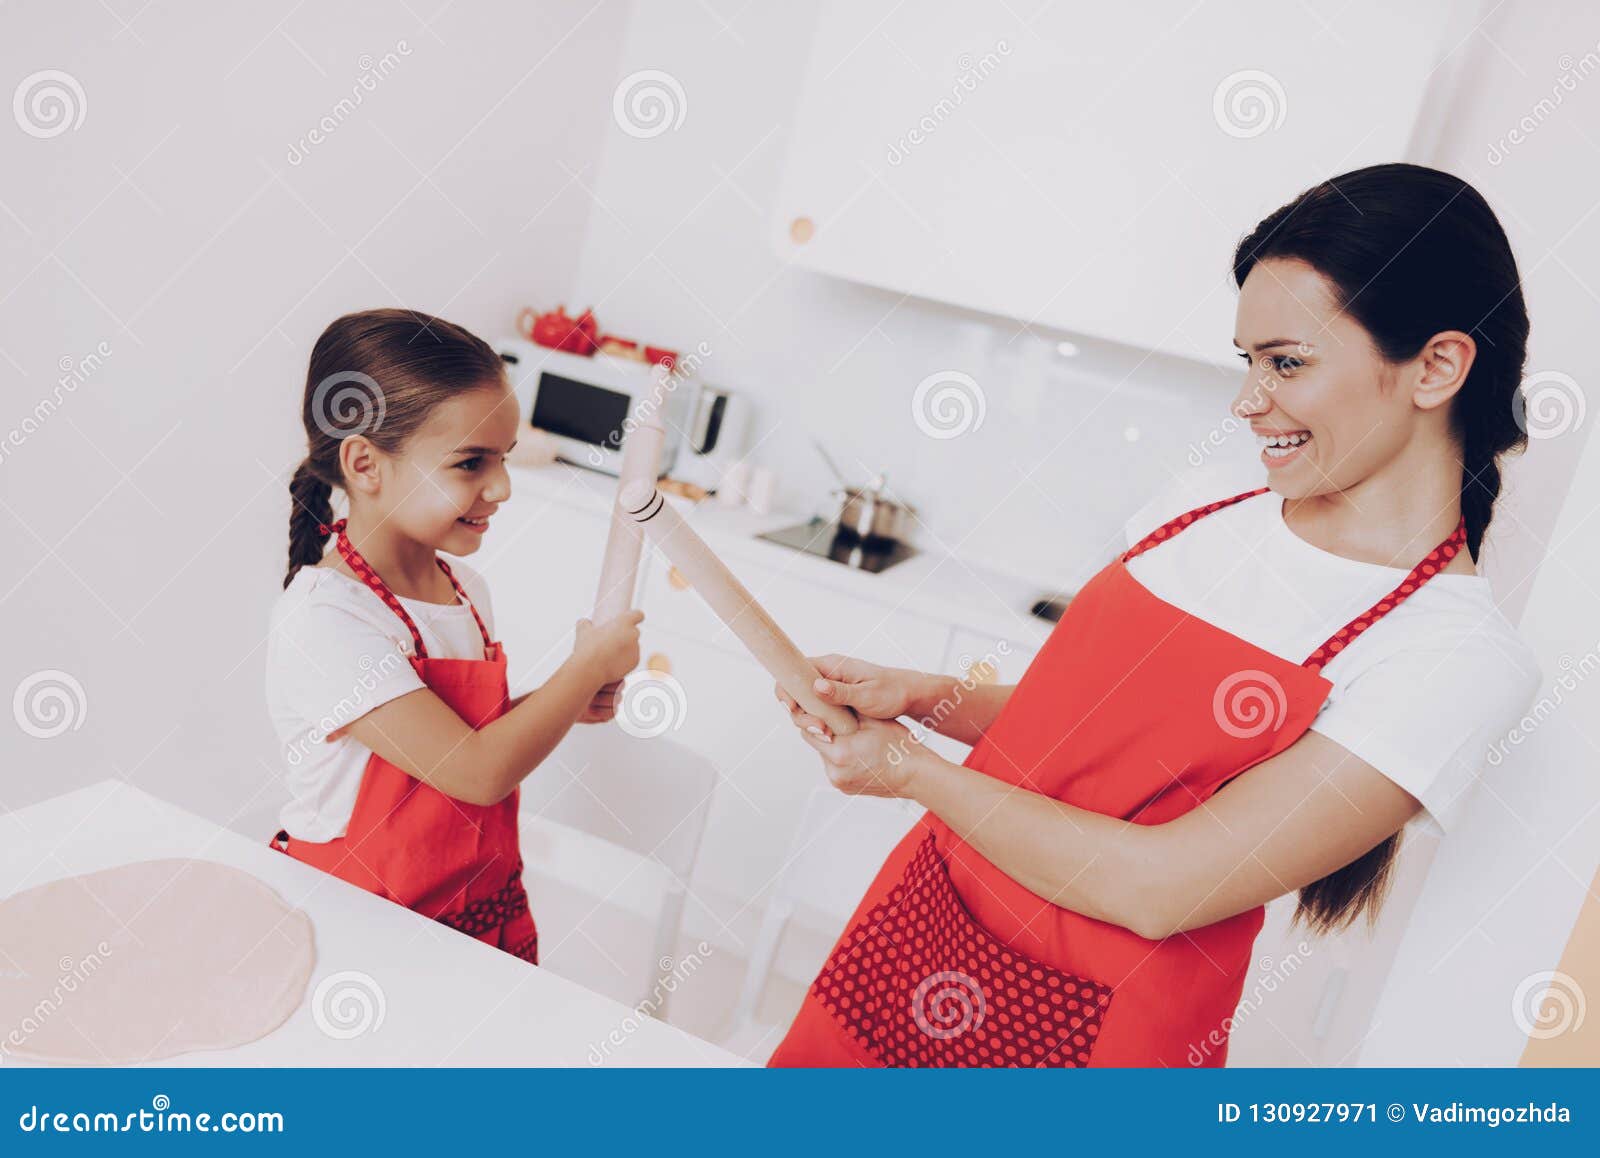 Daughter Fight With Mom Rolling Happy Family Time Stock Image I